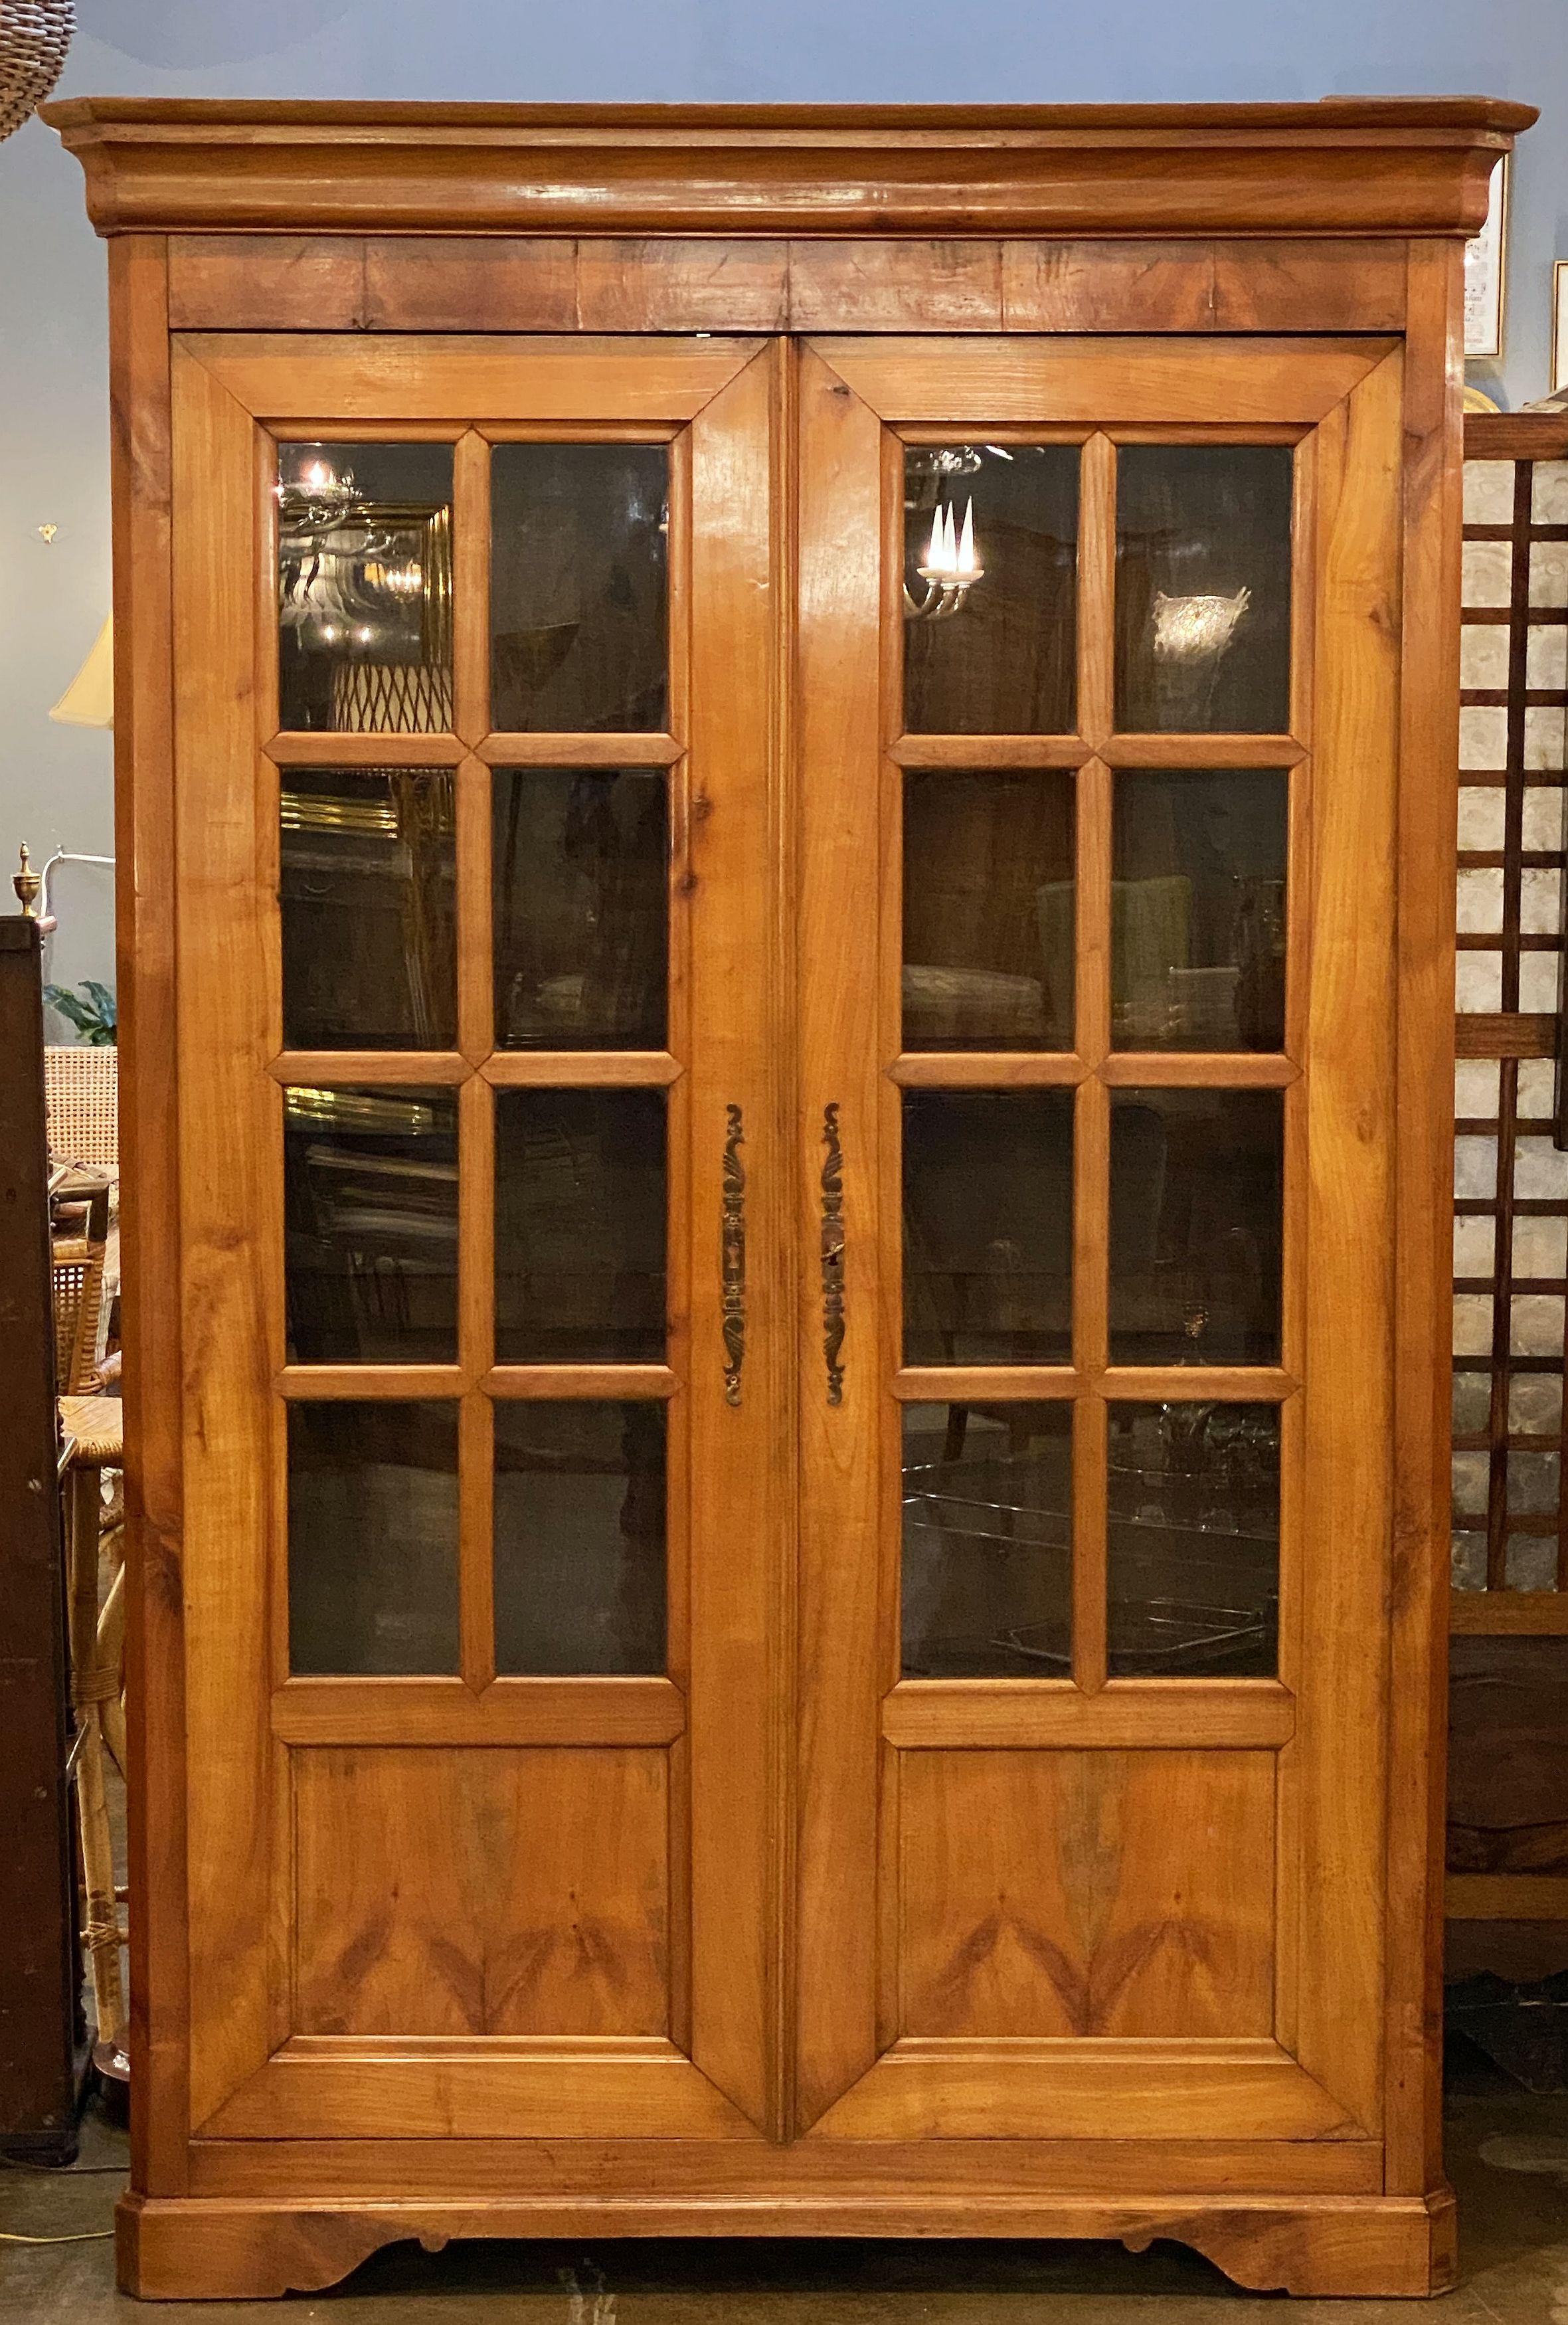 A handsome large French bookcase cabinet of cherry from the 19th c., featuring a moulded crown top over a frieze of two glazed paneled doors, the doors with decorative hardware and escutcheon, opening to an interior with four shelves, and standing